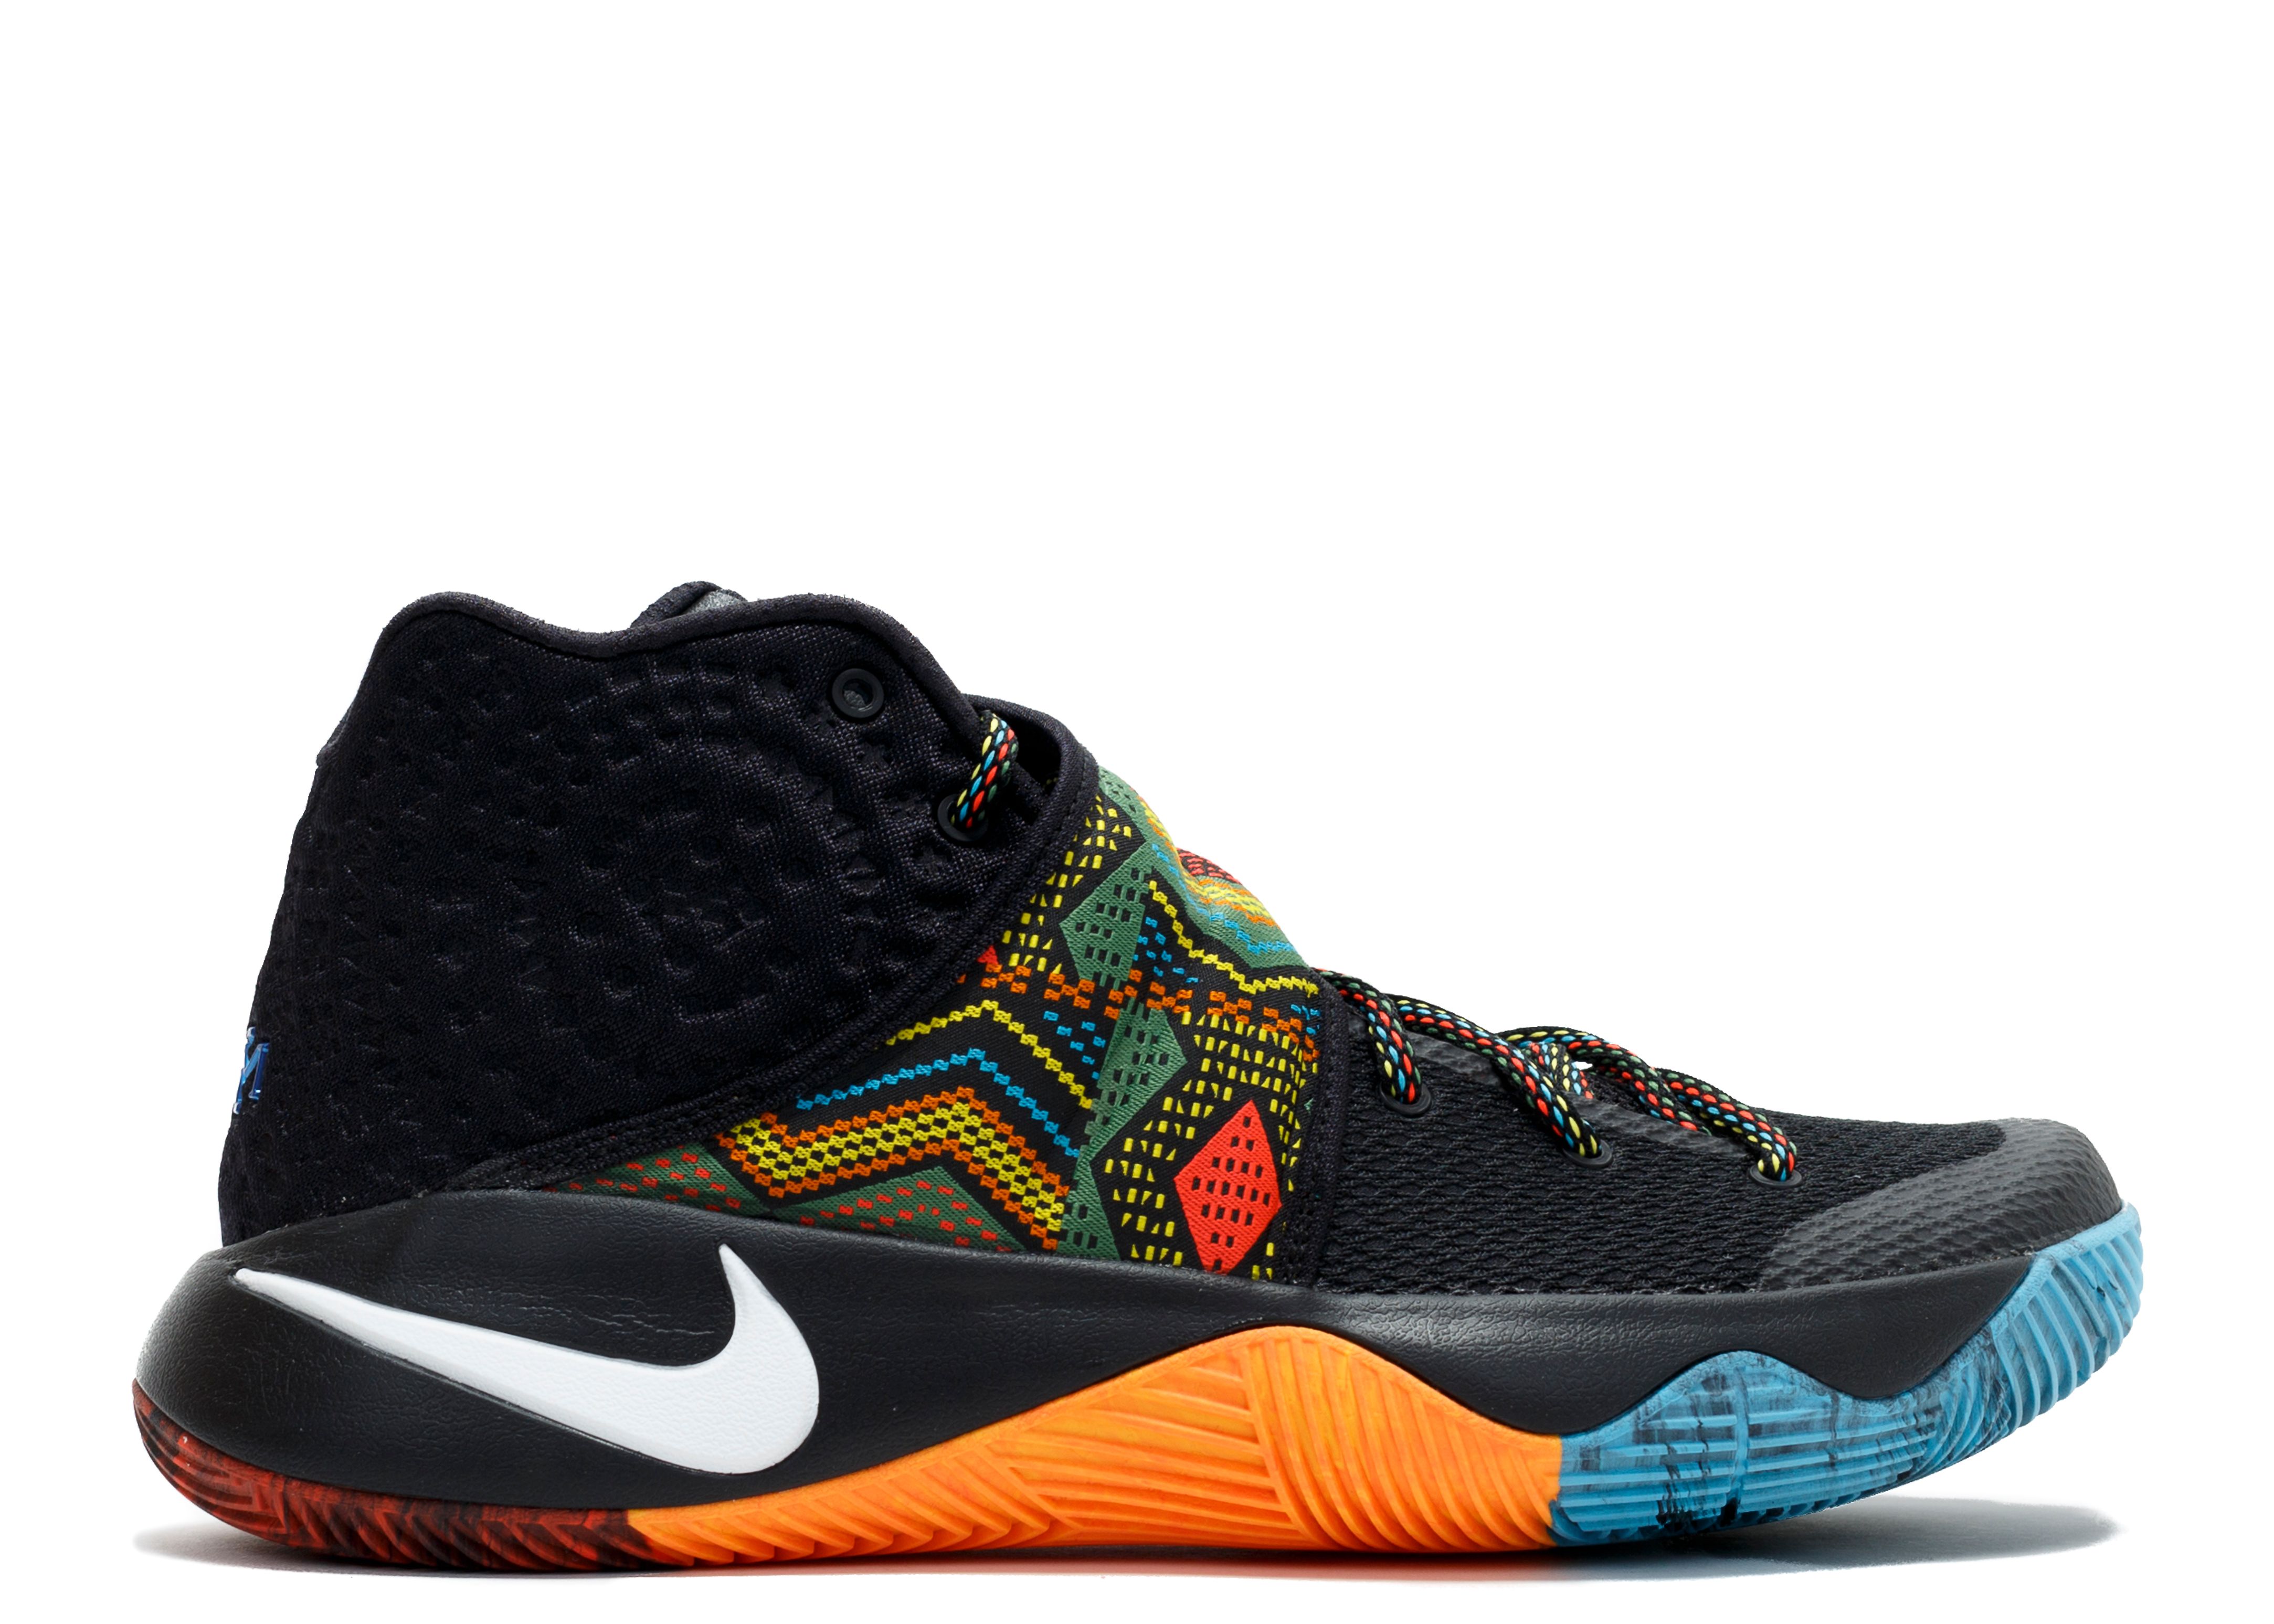 kyrie irving 2 shoes 2016